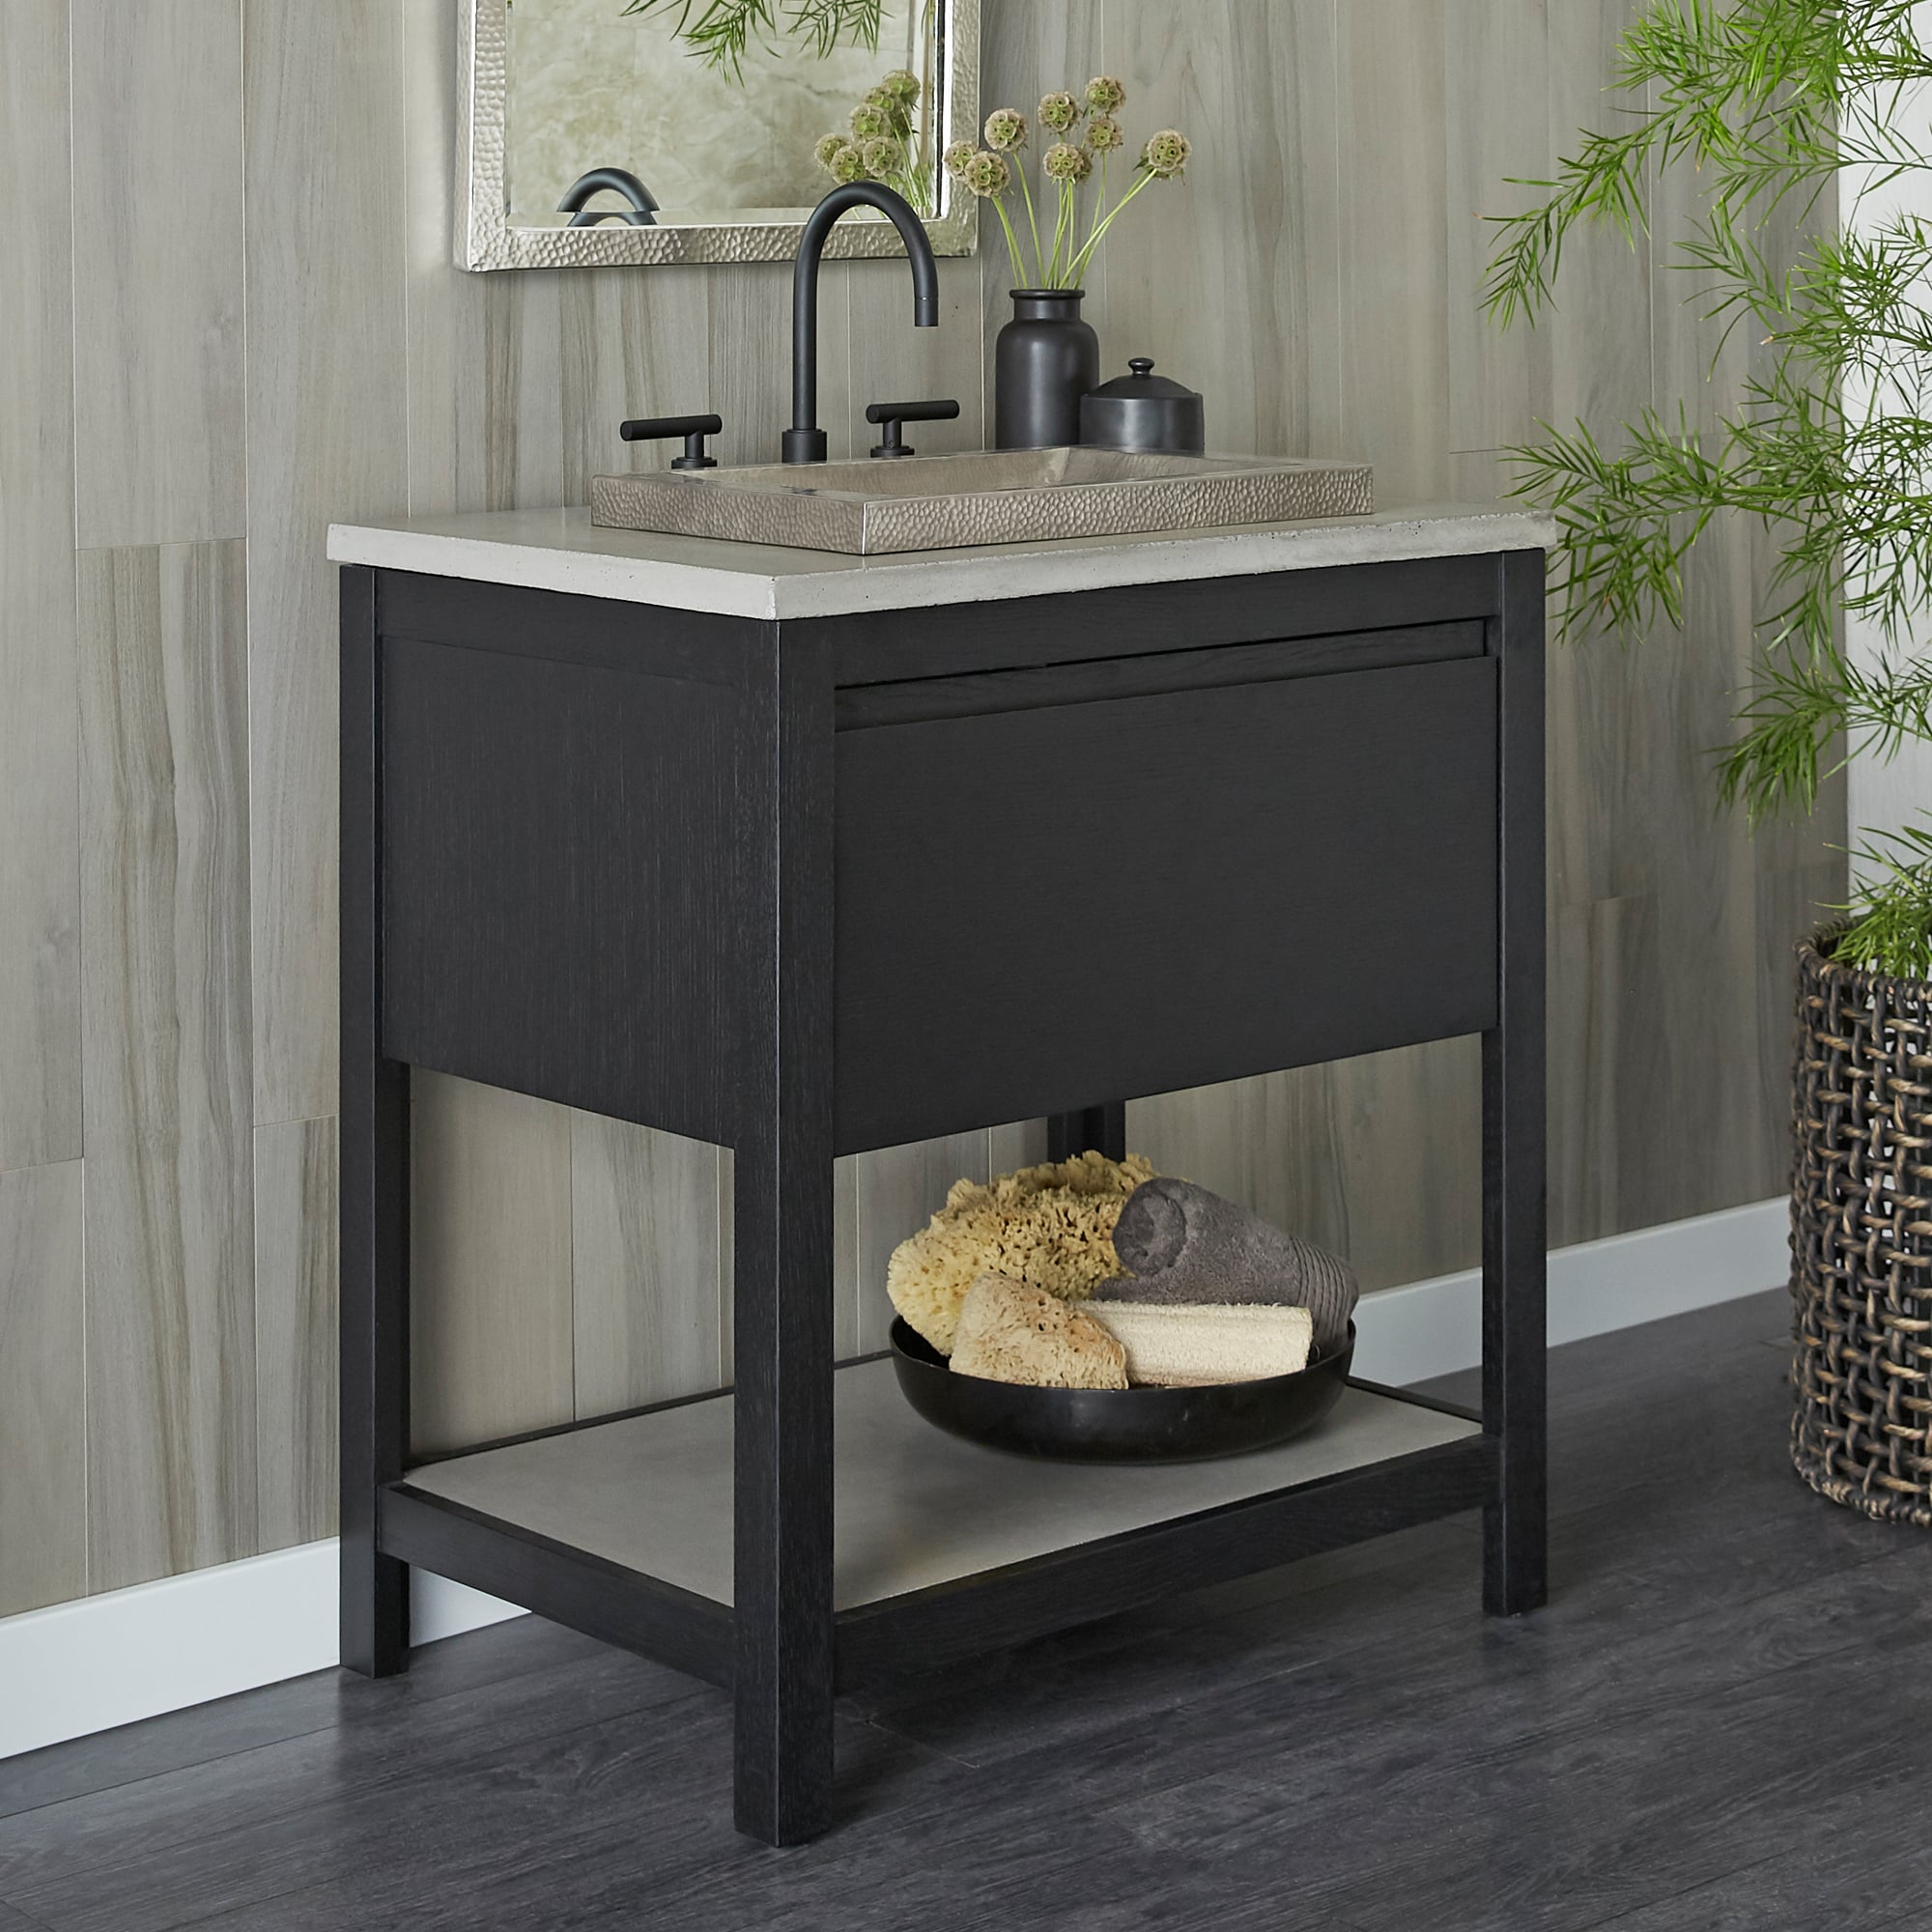 Native Trails 30 inch Solace Freestanding Vanity Base in Midnight Oak with Ash Shelf, VNO308-A